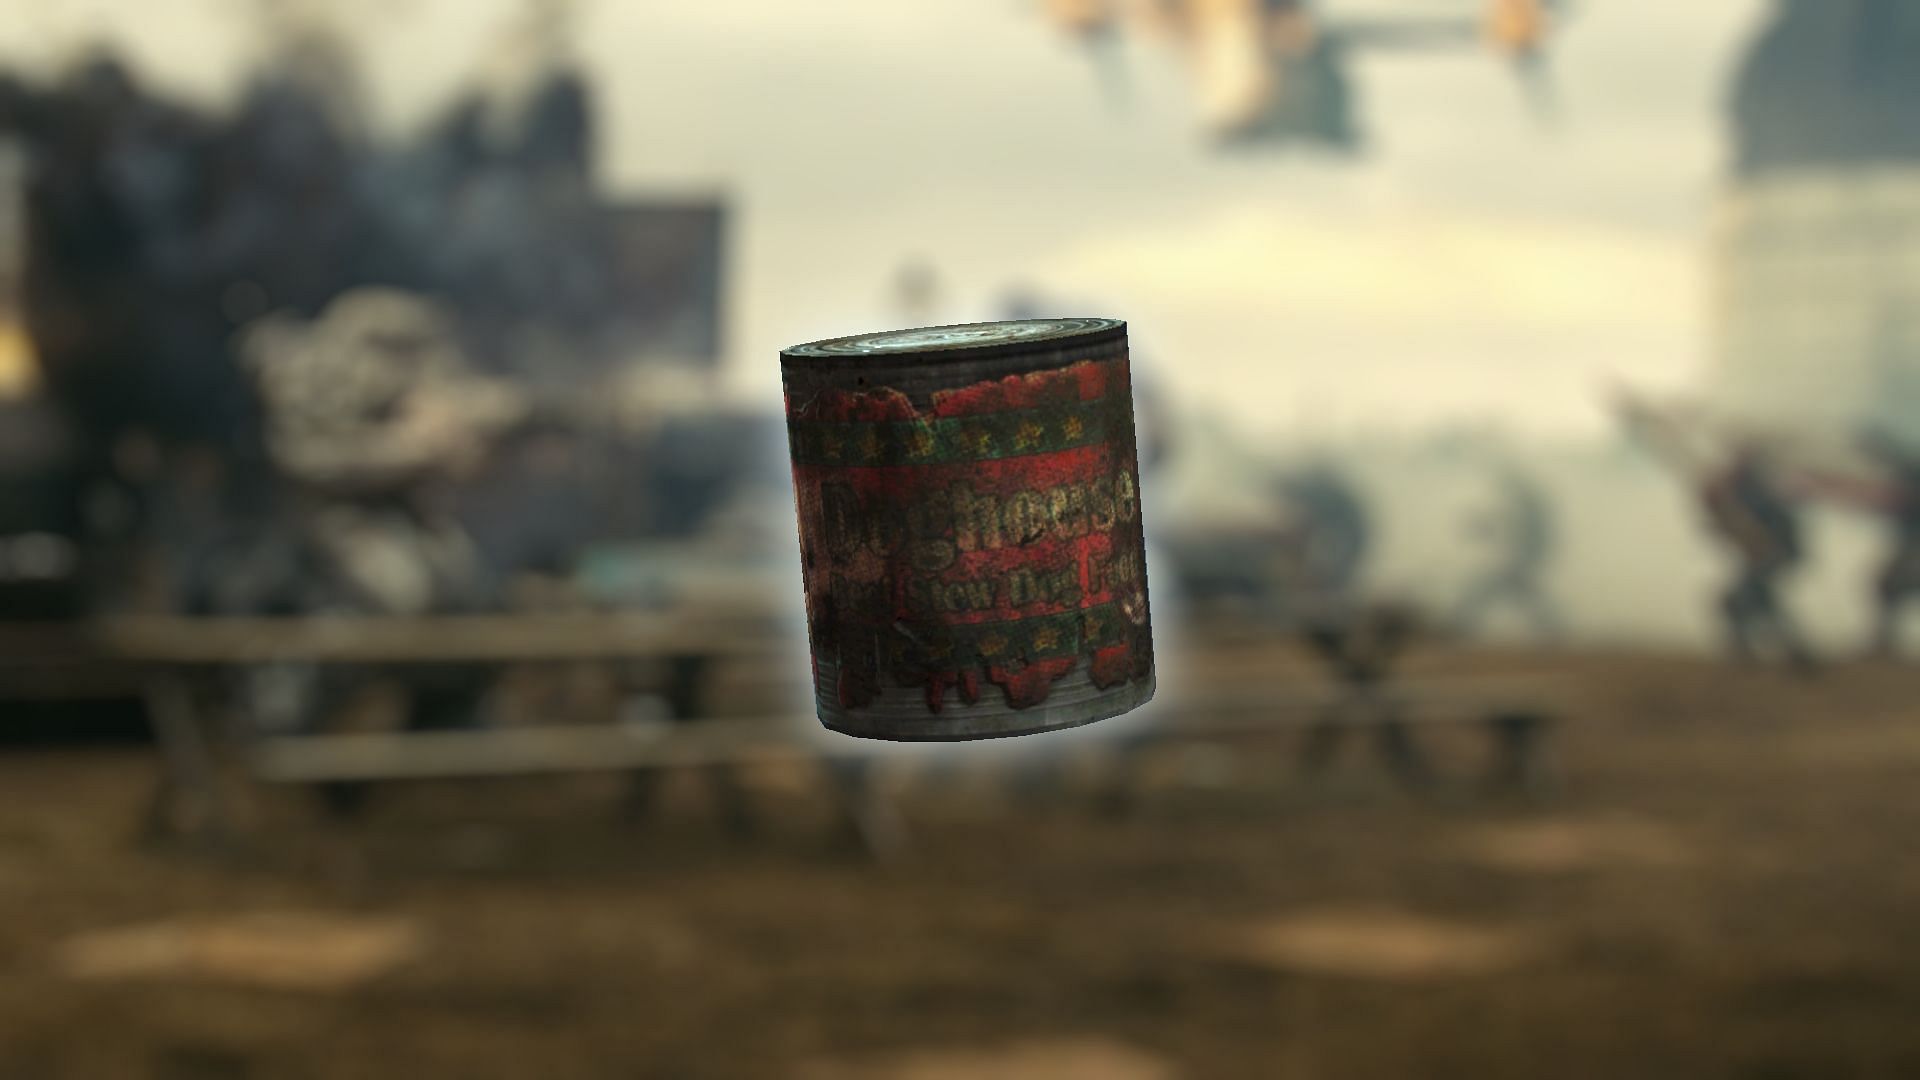 Canned Dog Food in Fallout 76